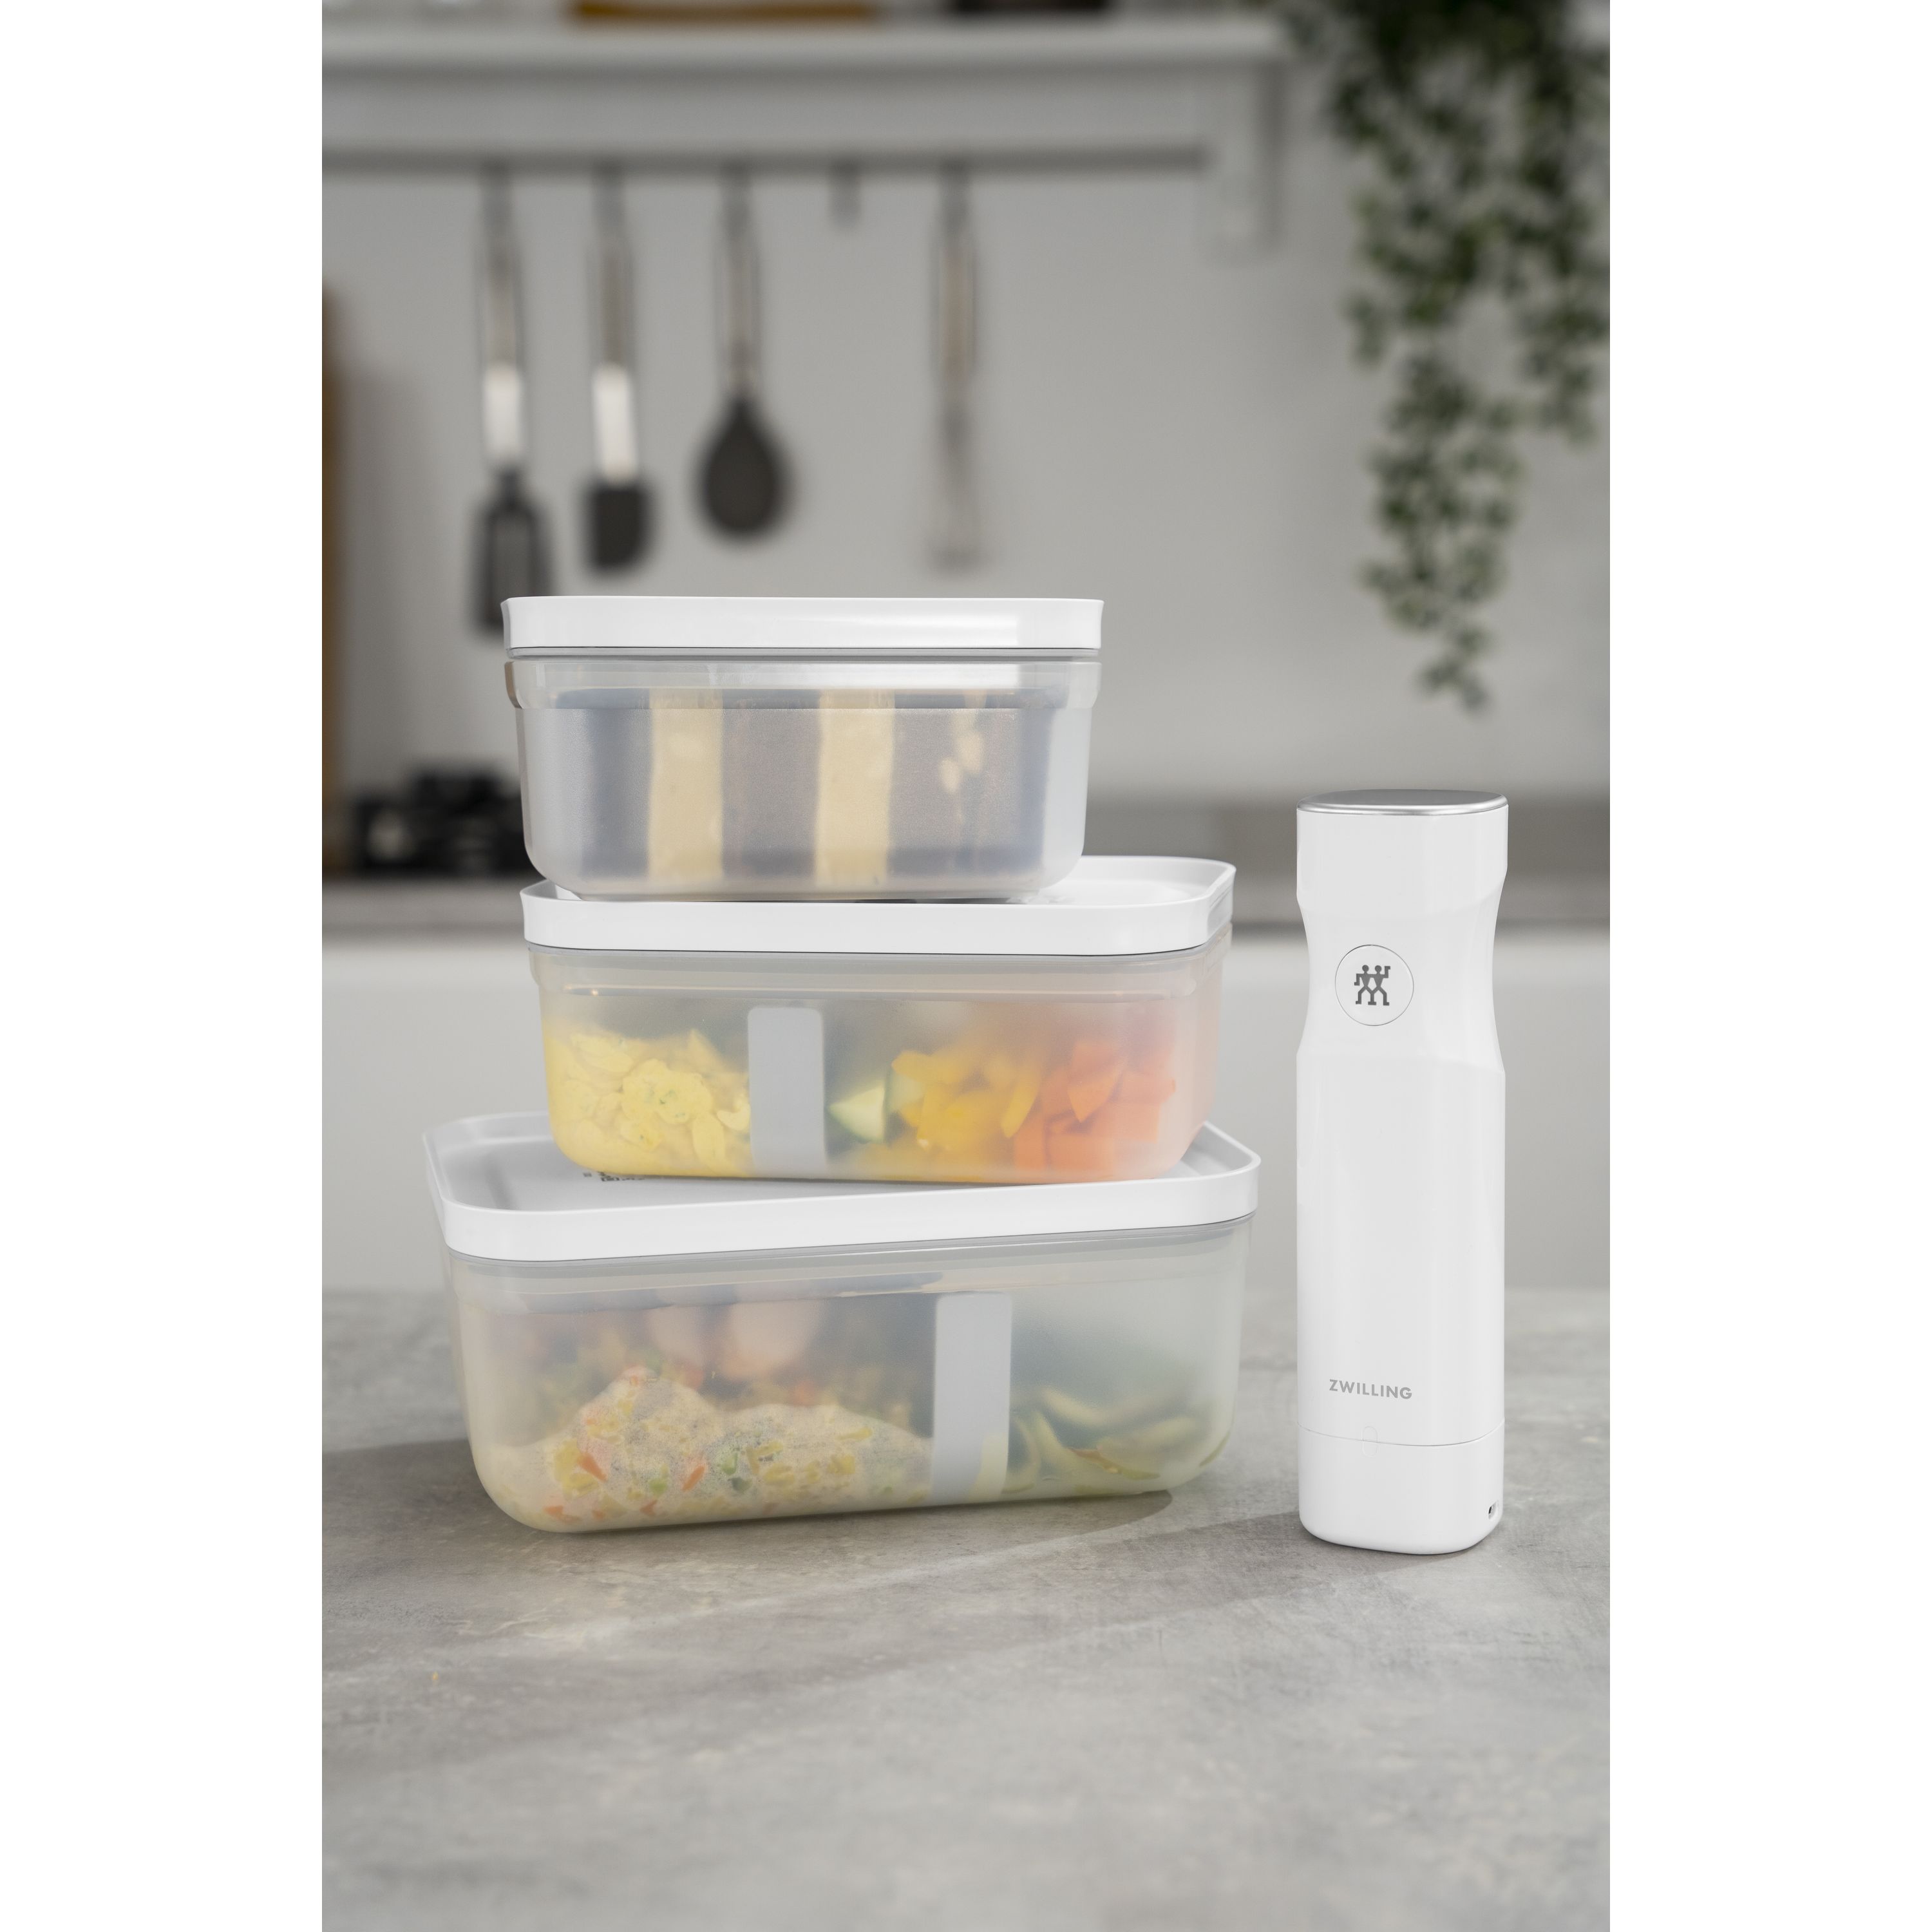 Zwilling Fresh & Save Plastic Lunch Box, Airtight Food Storage Container,  Meal Prep Container, Bpa-Free, Grey, Semitransparent - Small